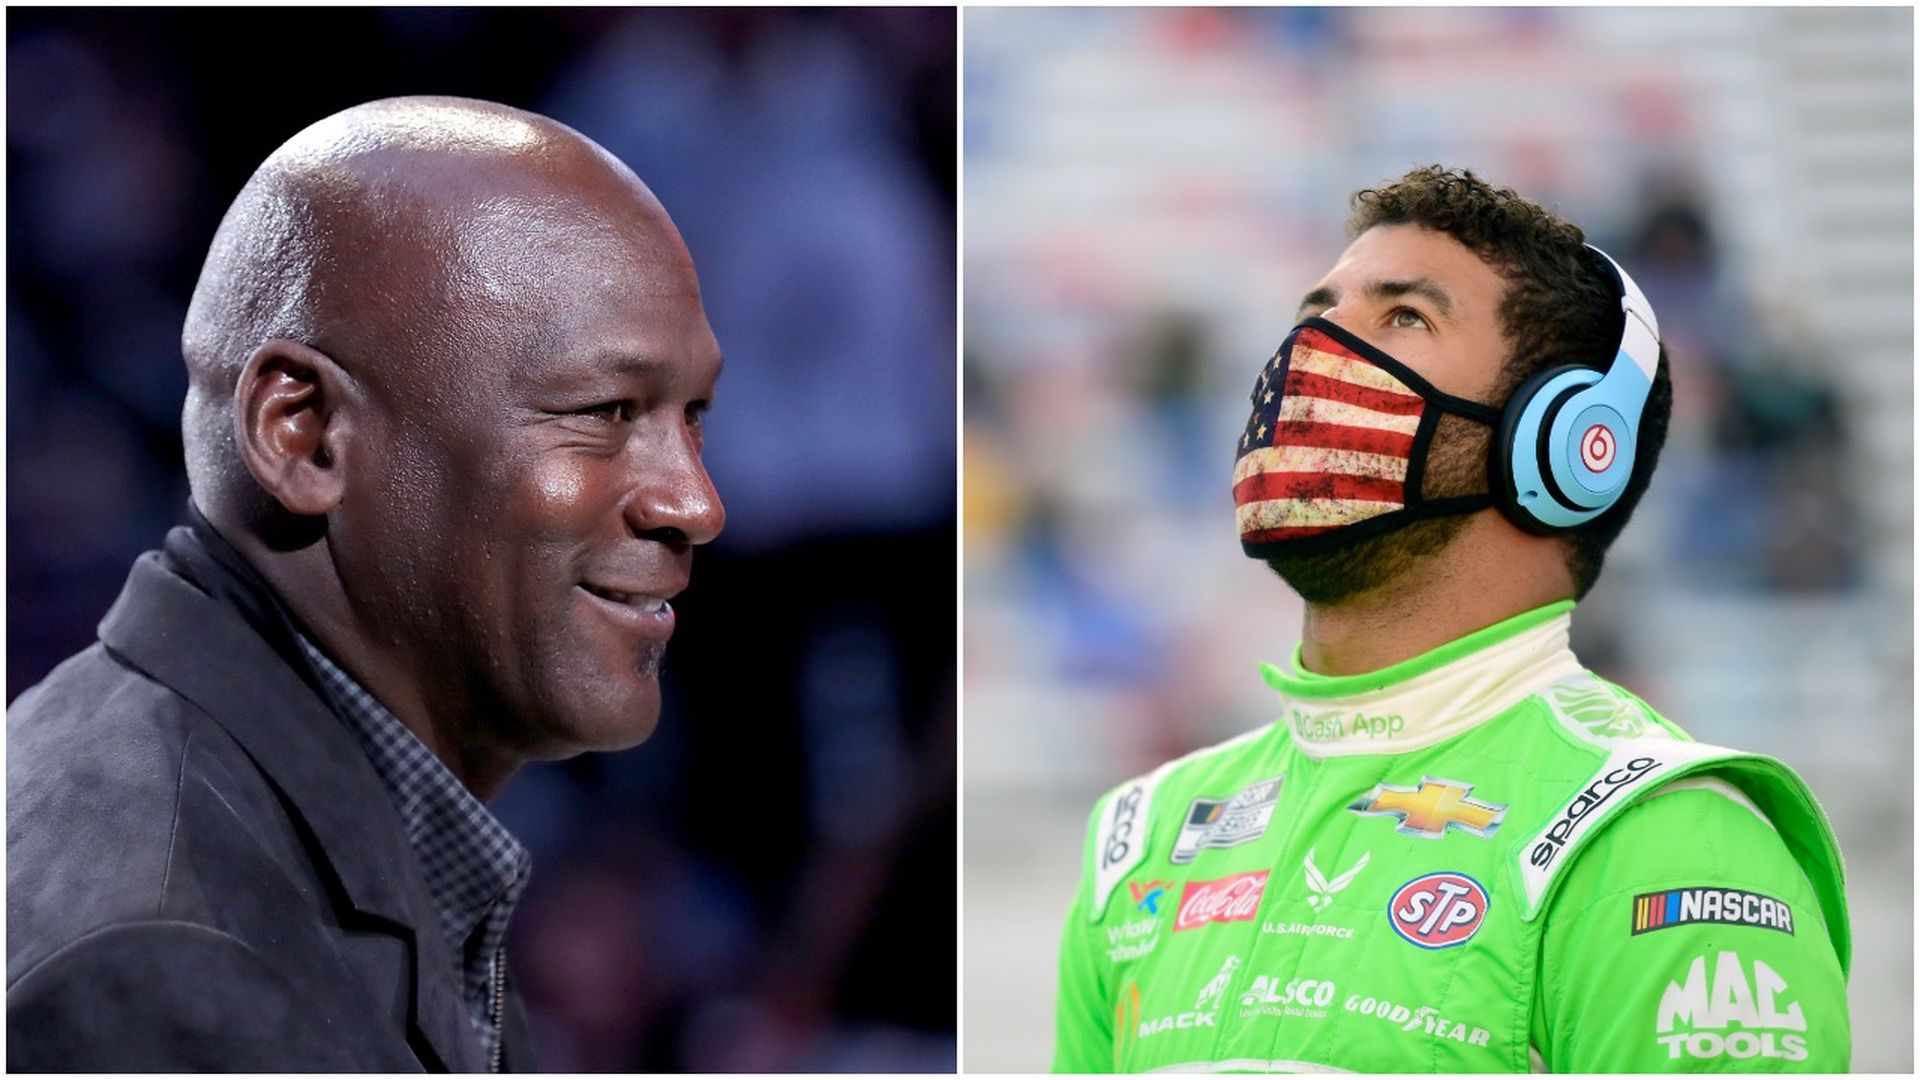 Combination images of Michael Jordan and Bubba Wallace